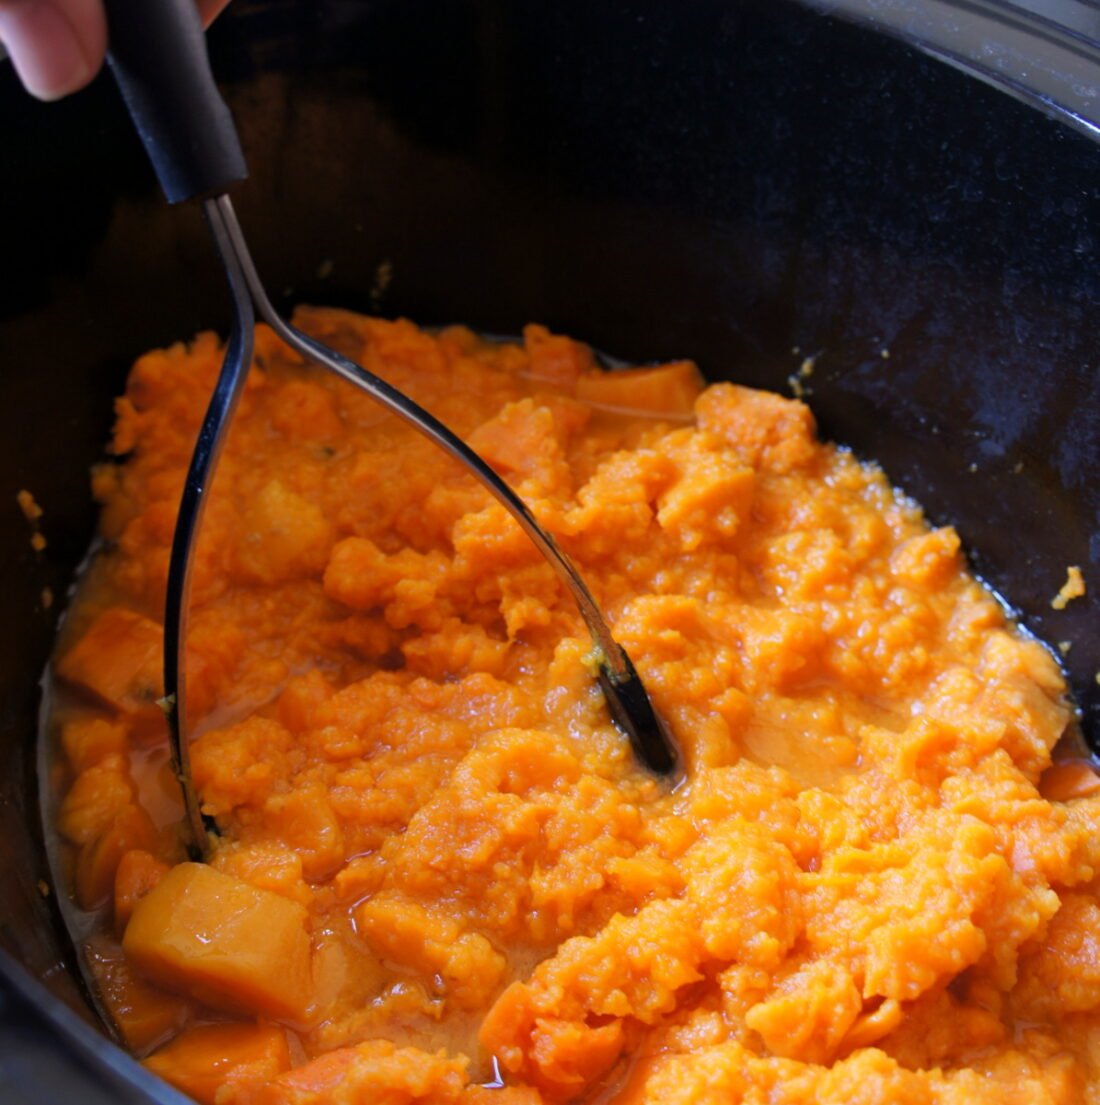 A pan filled with food, with Sweet potato